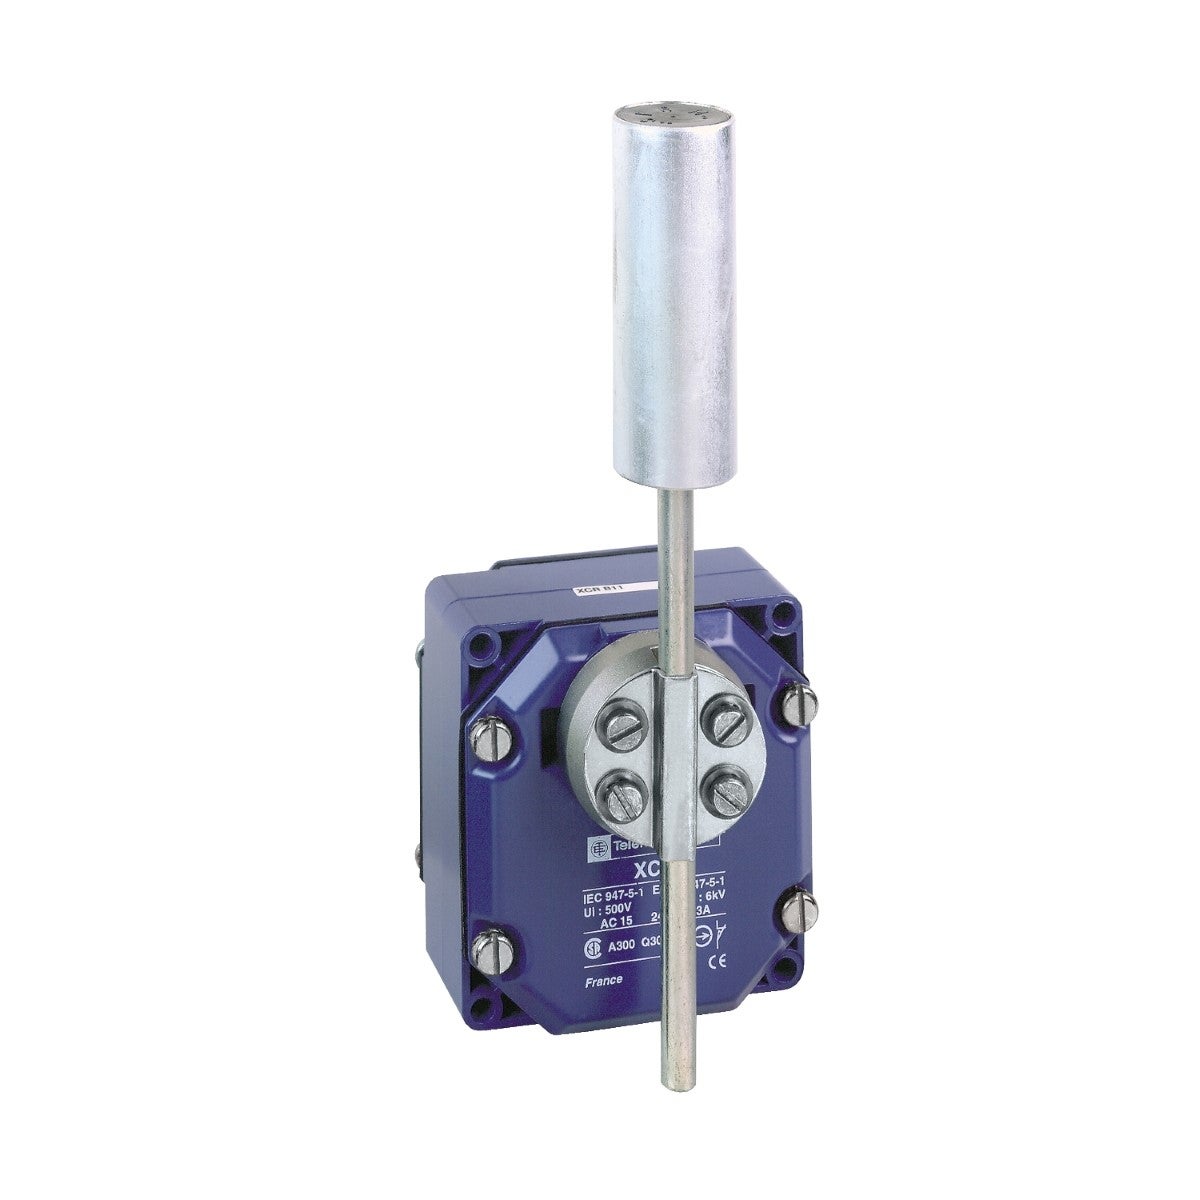 Limit switch, Limit switches XC Standard, XCRT, metal enclosure zinc plated steel roller with lever, 2C/O